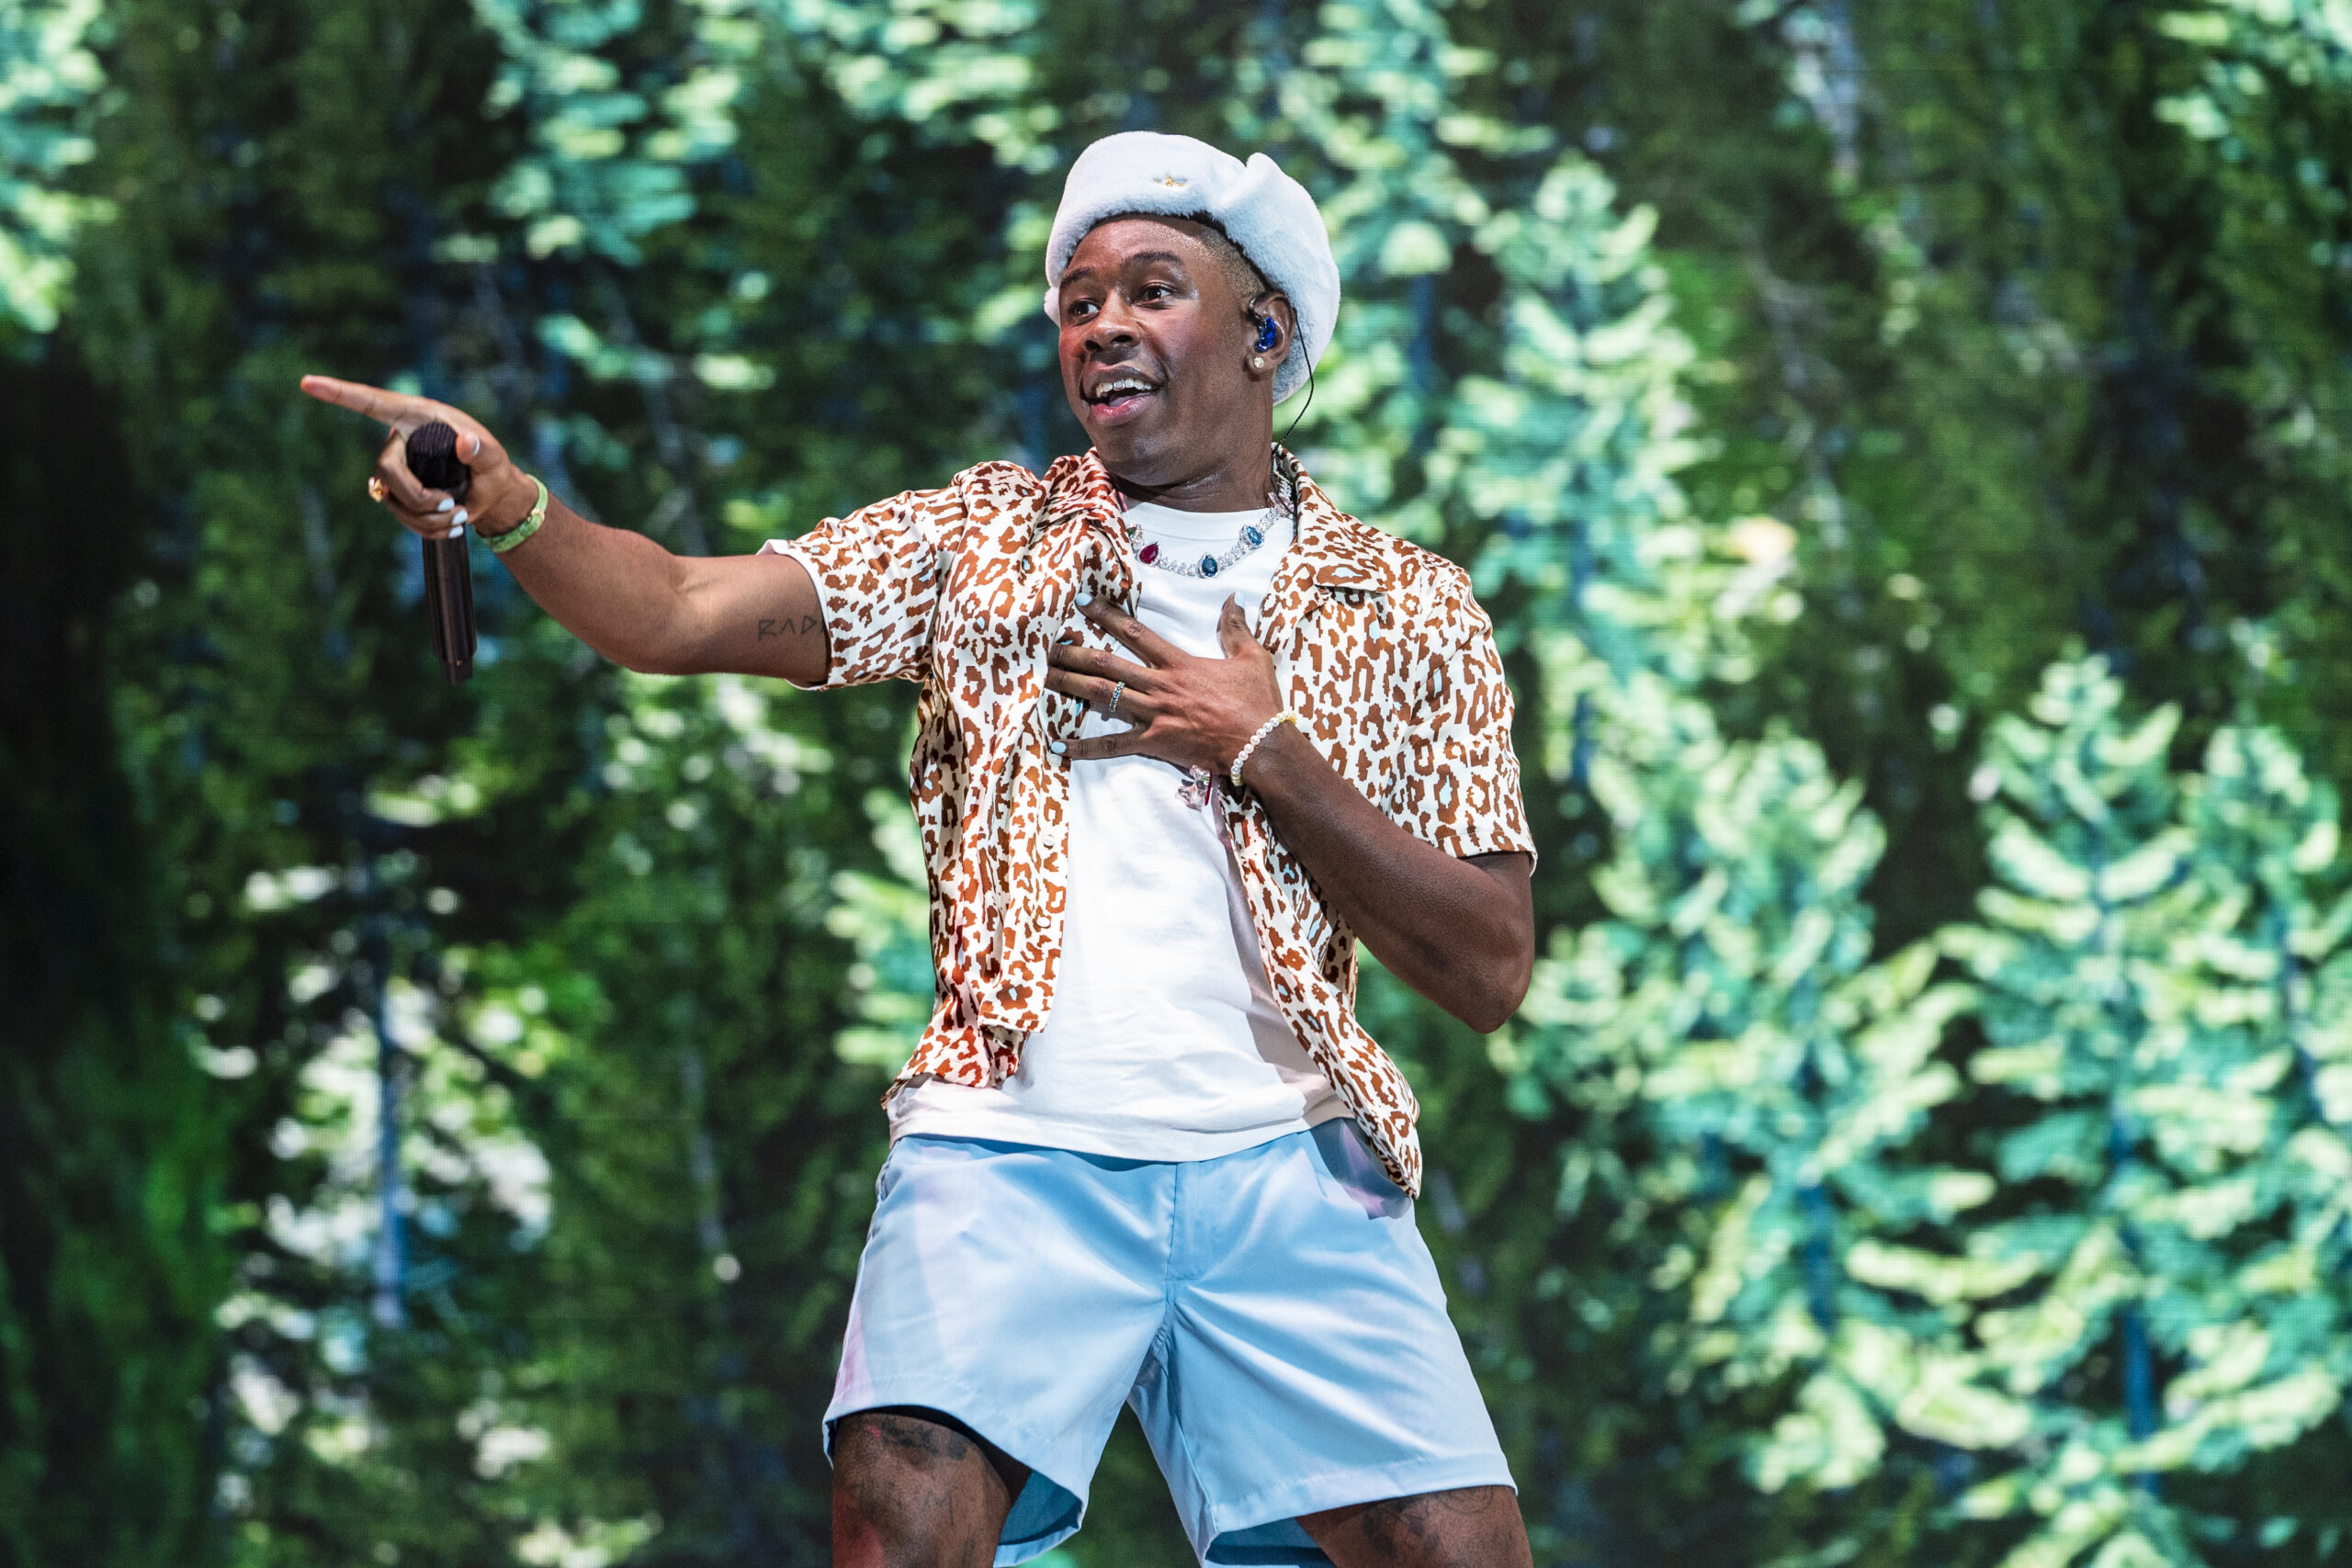 Tyler, The Creator's Camp Flog Gnaw to skip another year, will